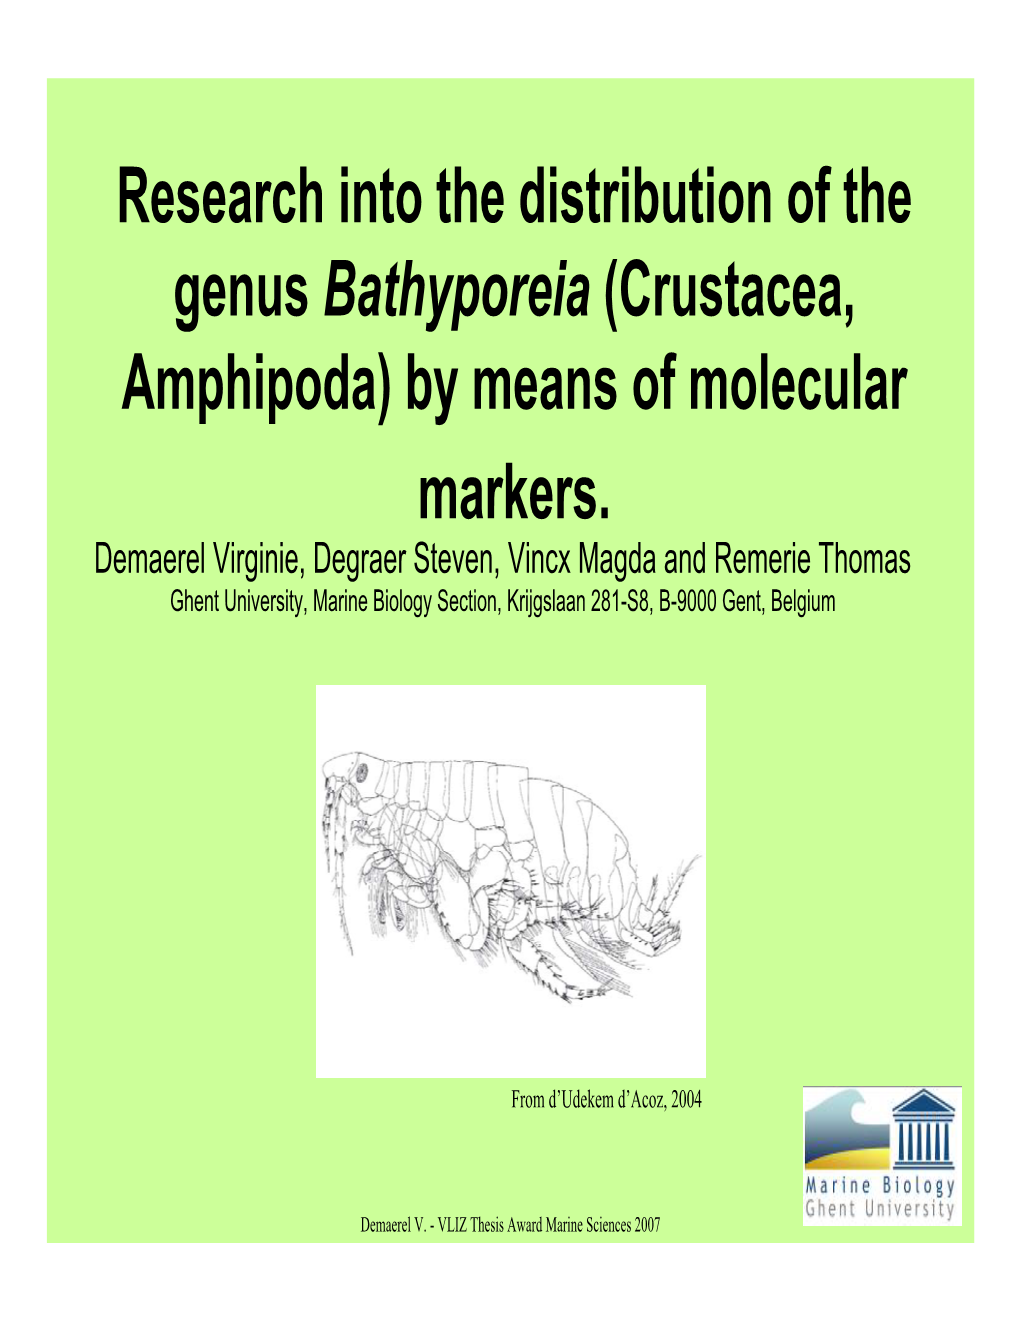 Research Into the Distribution of the Genus Bathyporeia (Crustacea, Amphipoda) by Means of Molecular Markers